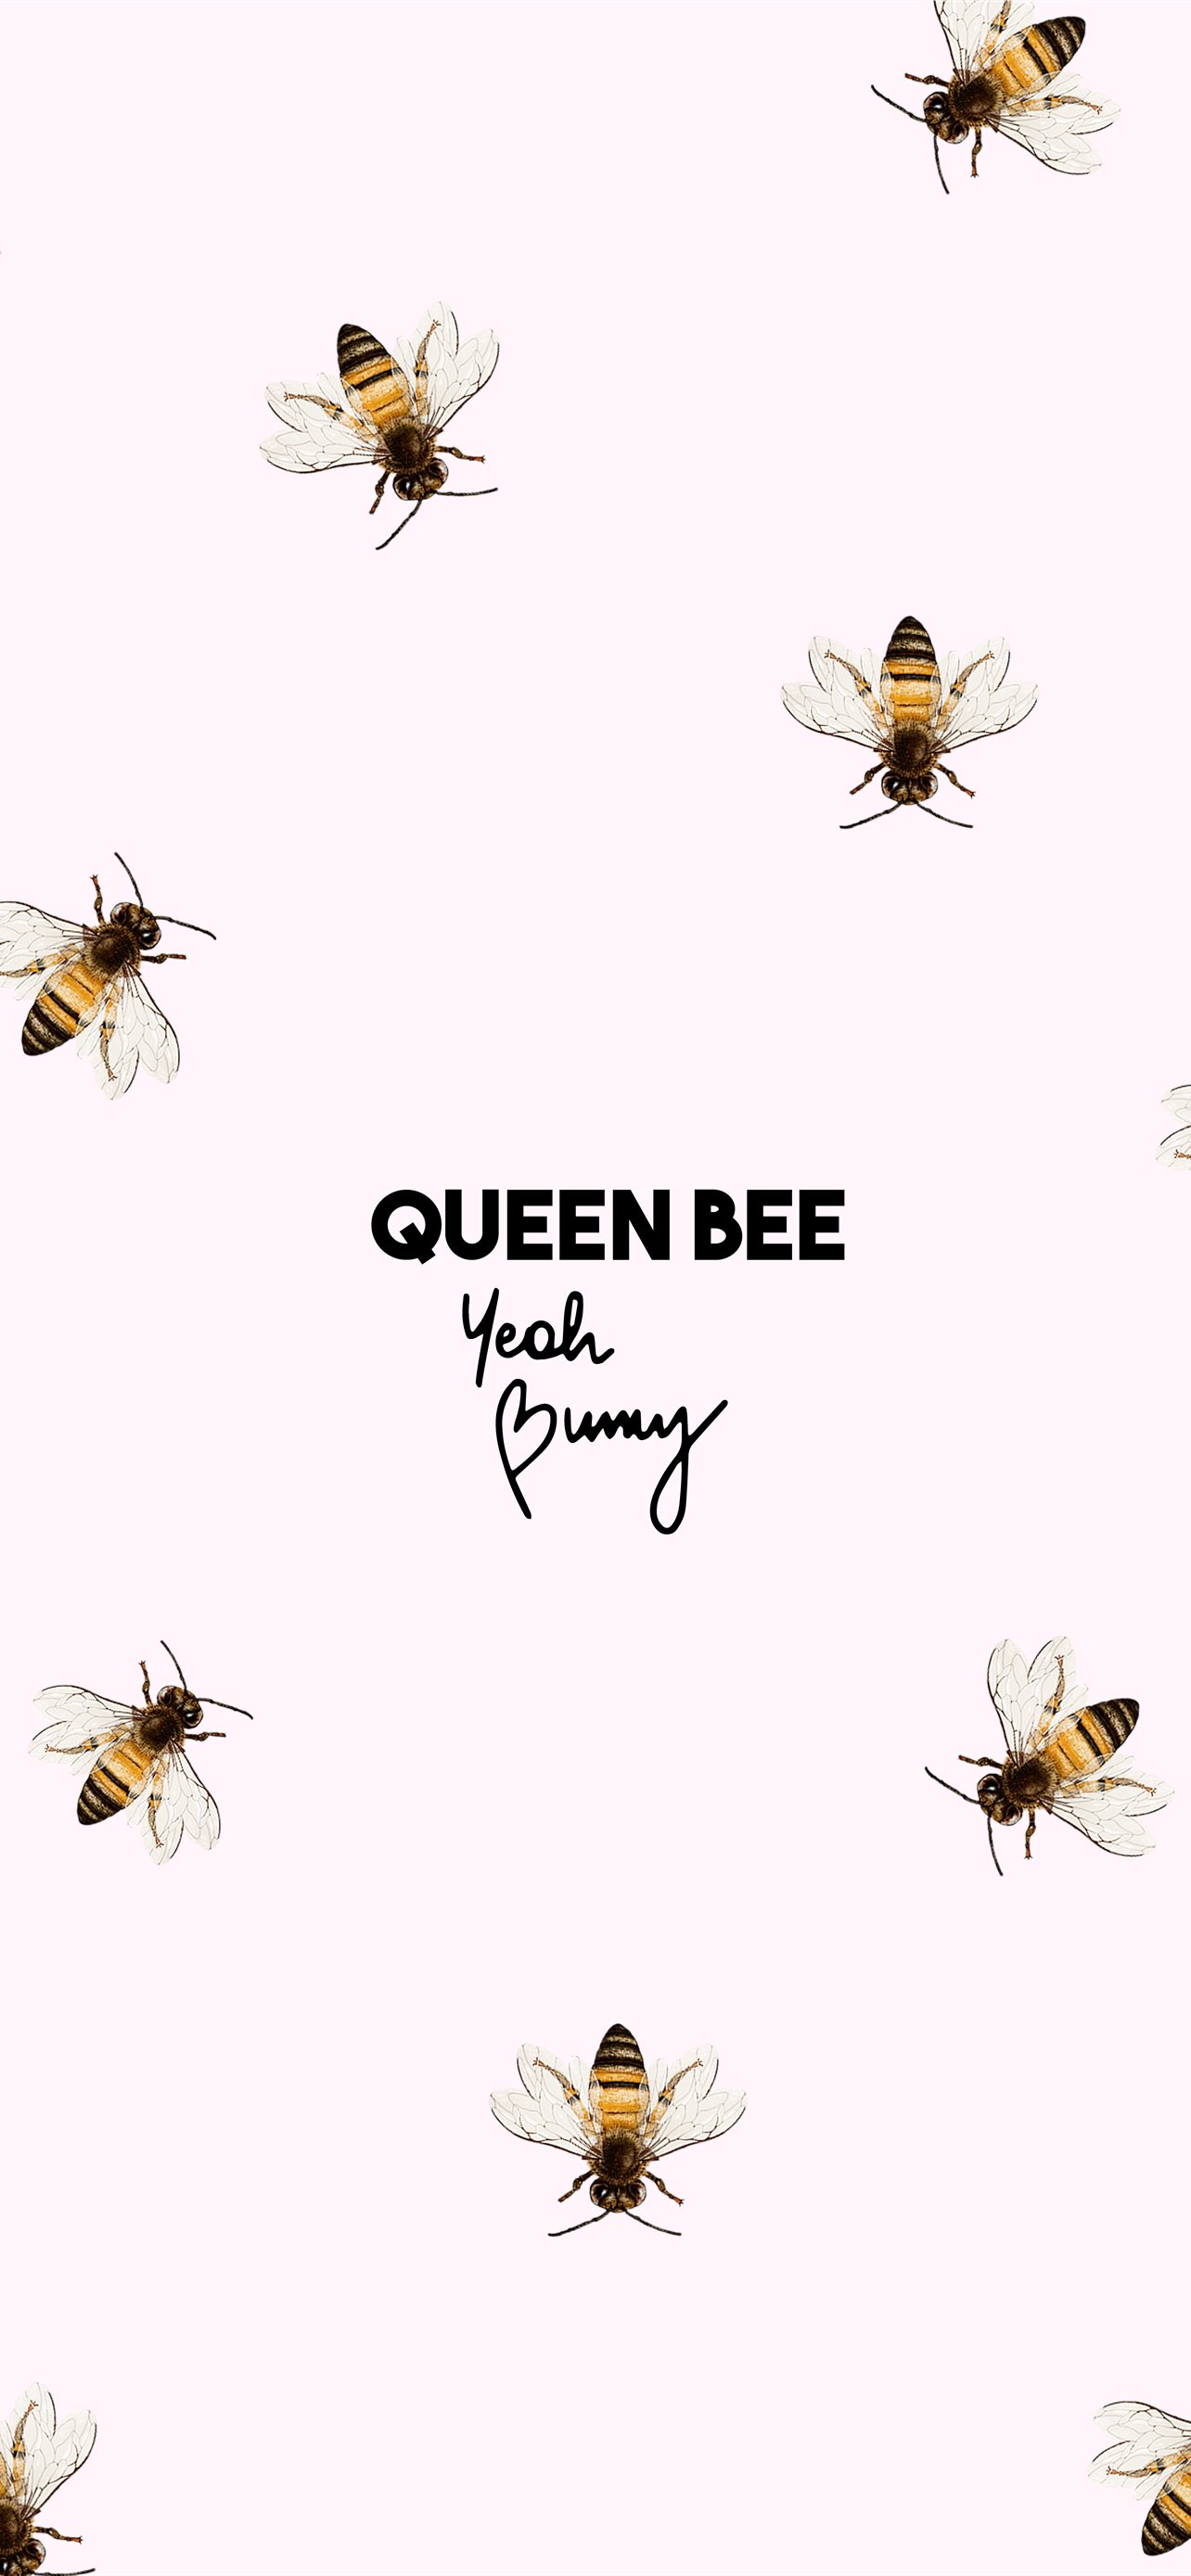 100 Bee Pictures  Download Free Images  Stock Photos on Unsplash